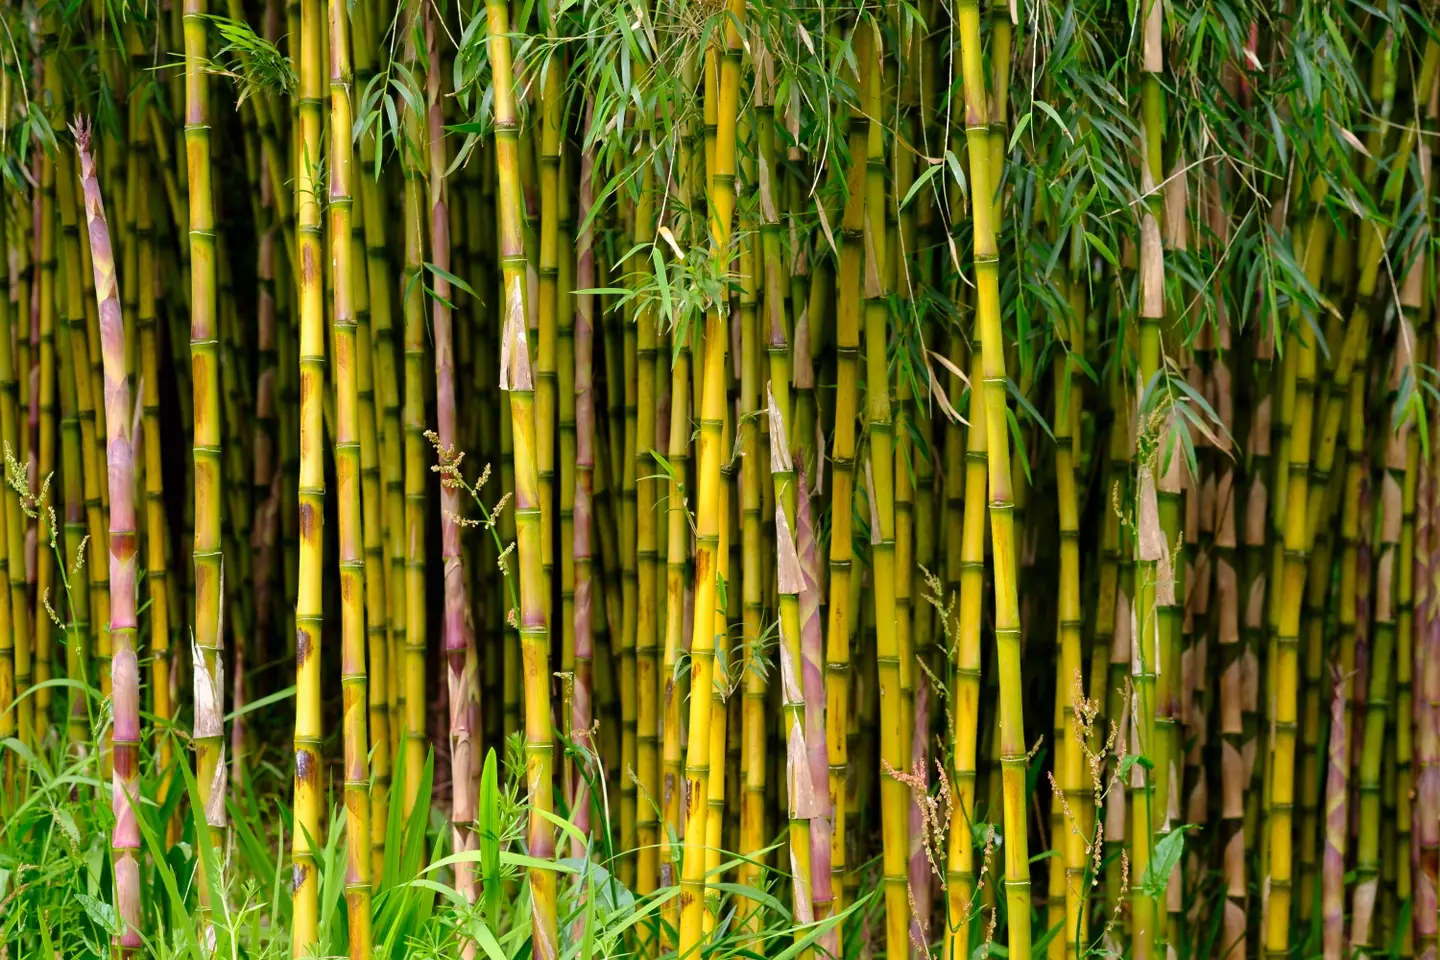 Invasive bamboo can damage your property.